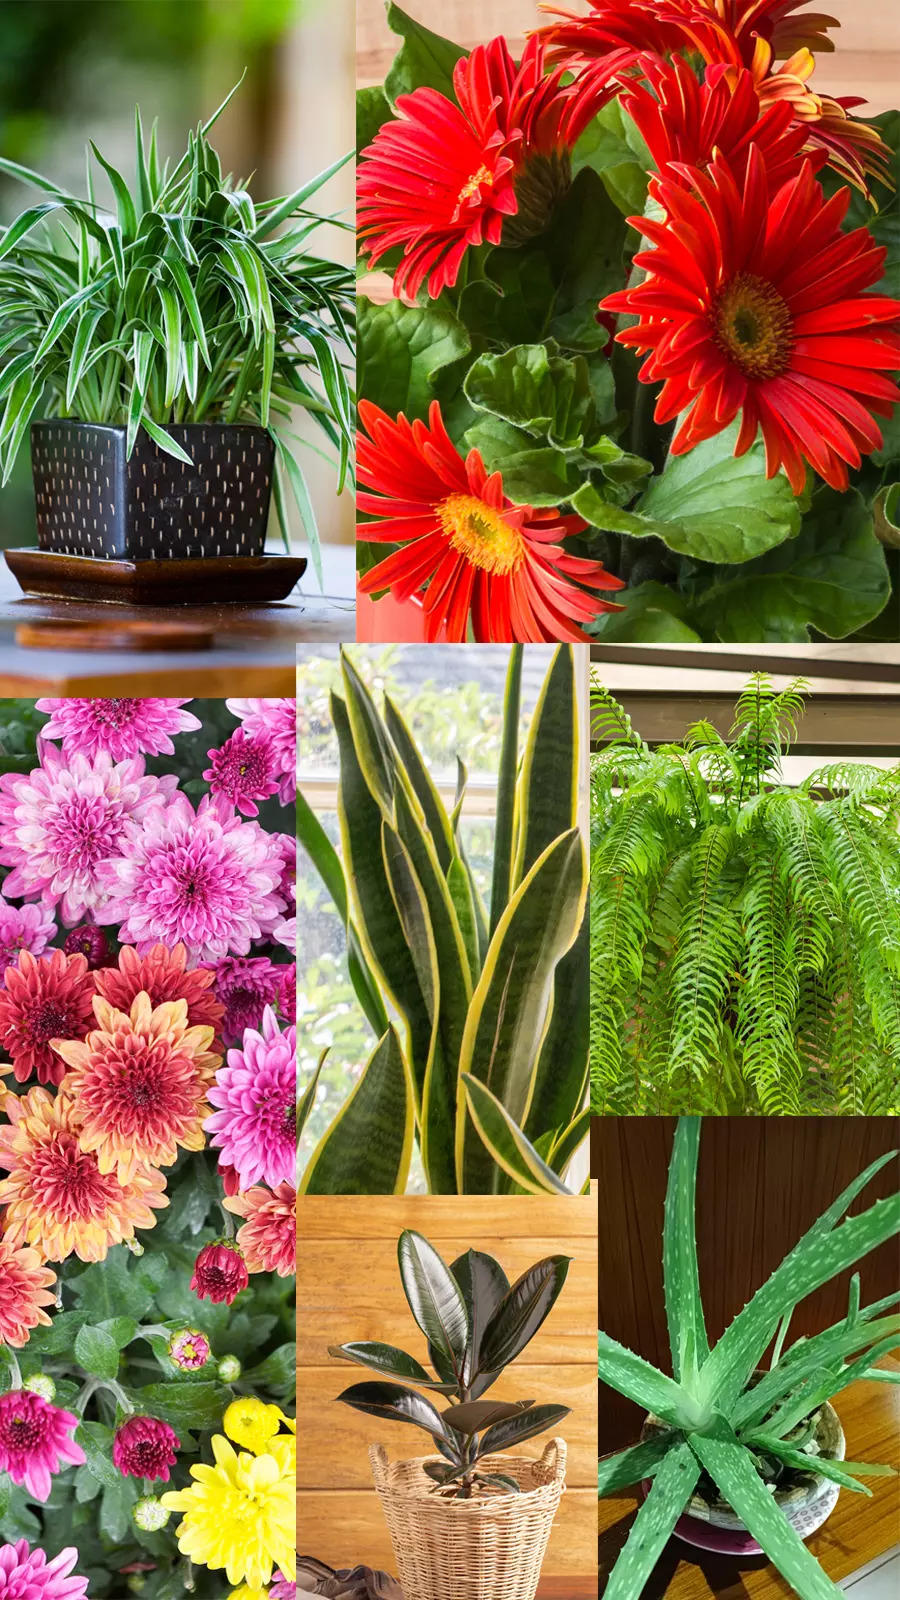 Combat pollution with greenery: Top 10 air-purifying plants for a healthier home